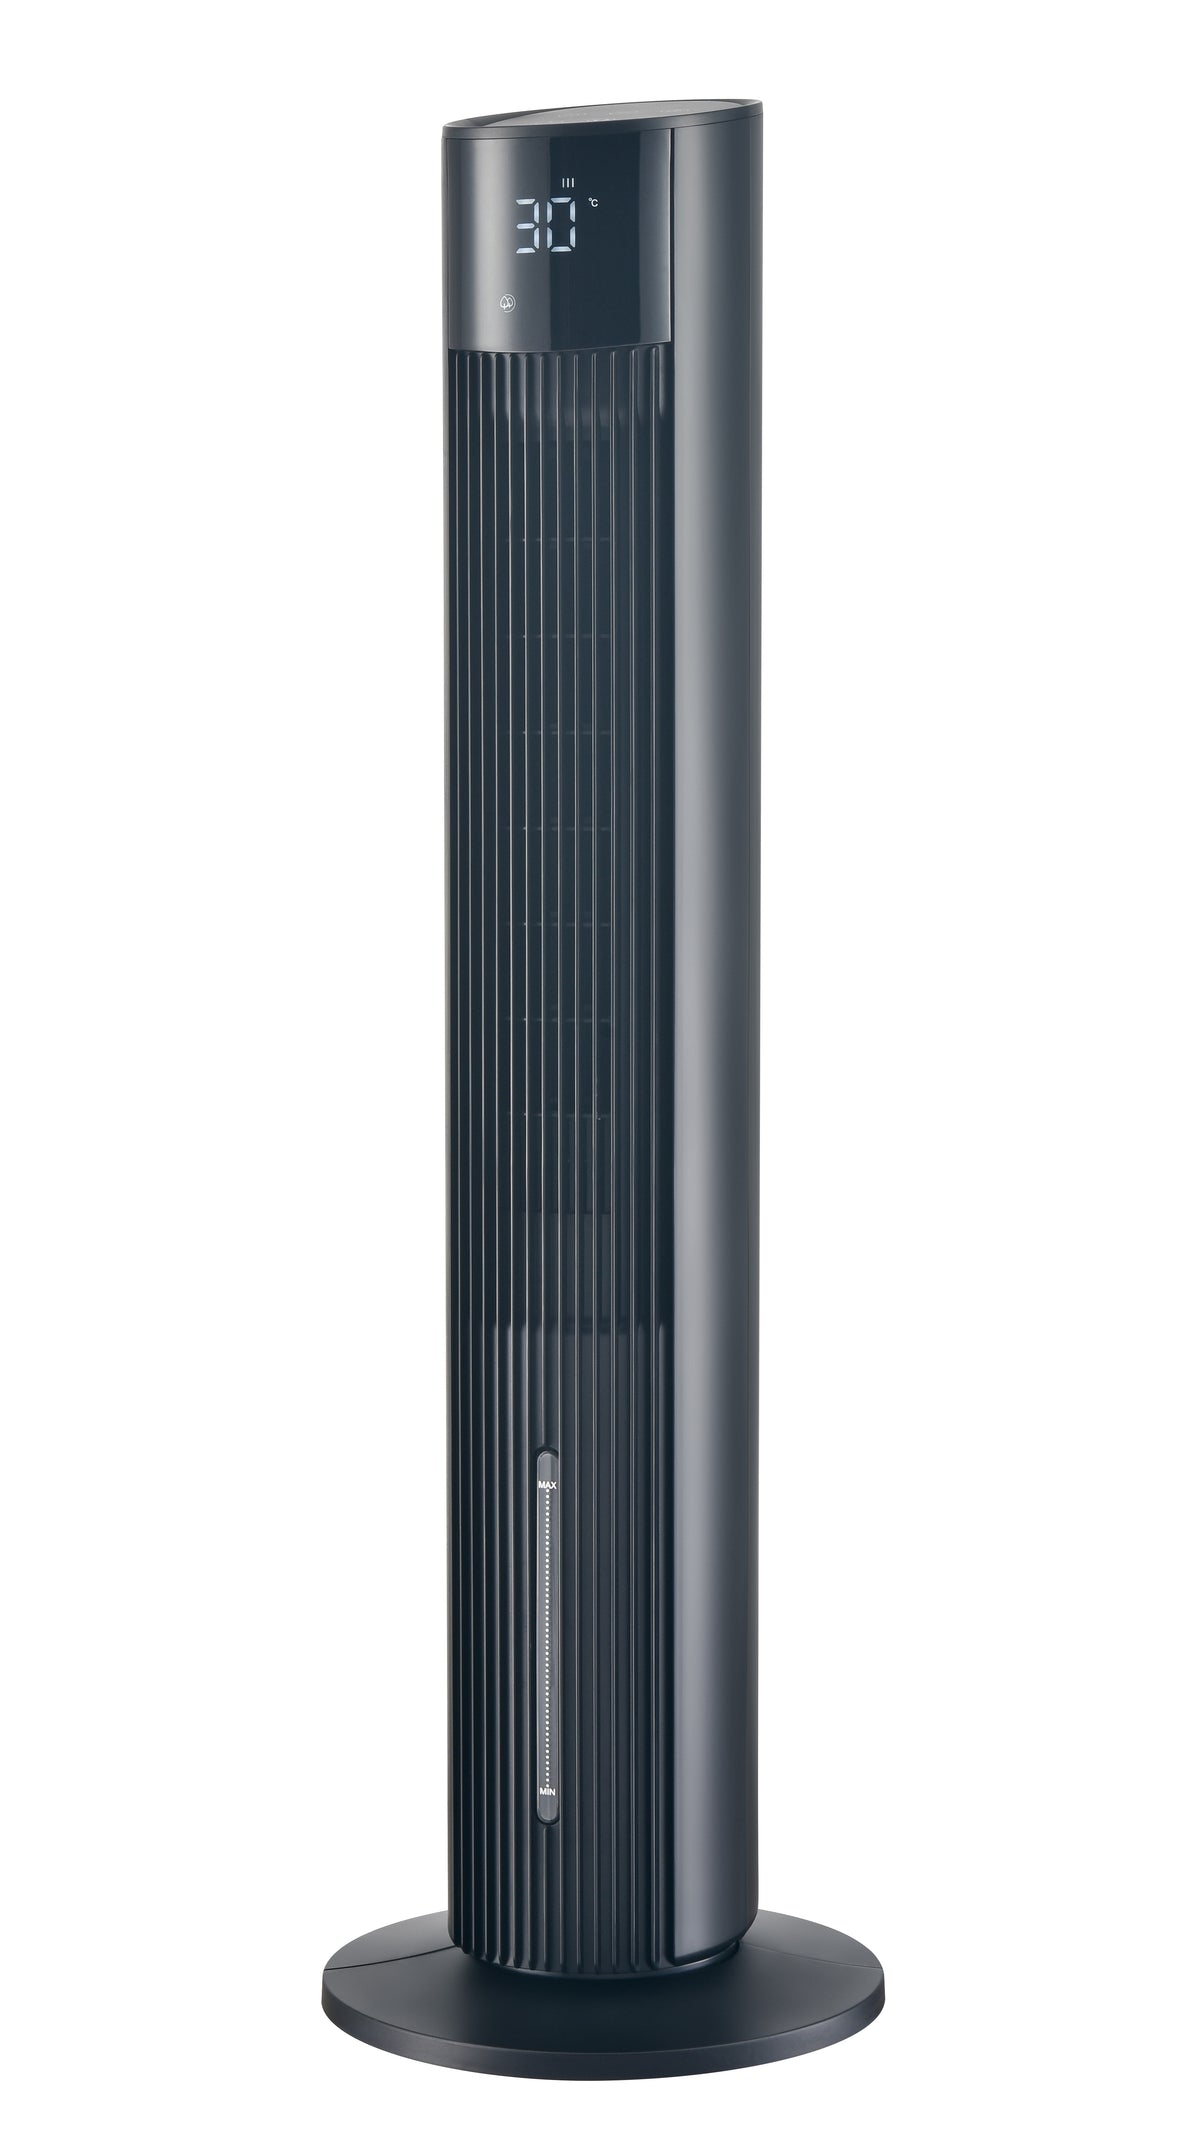 Black 42-Inch Air Cooler Tower Fan With Remote Control